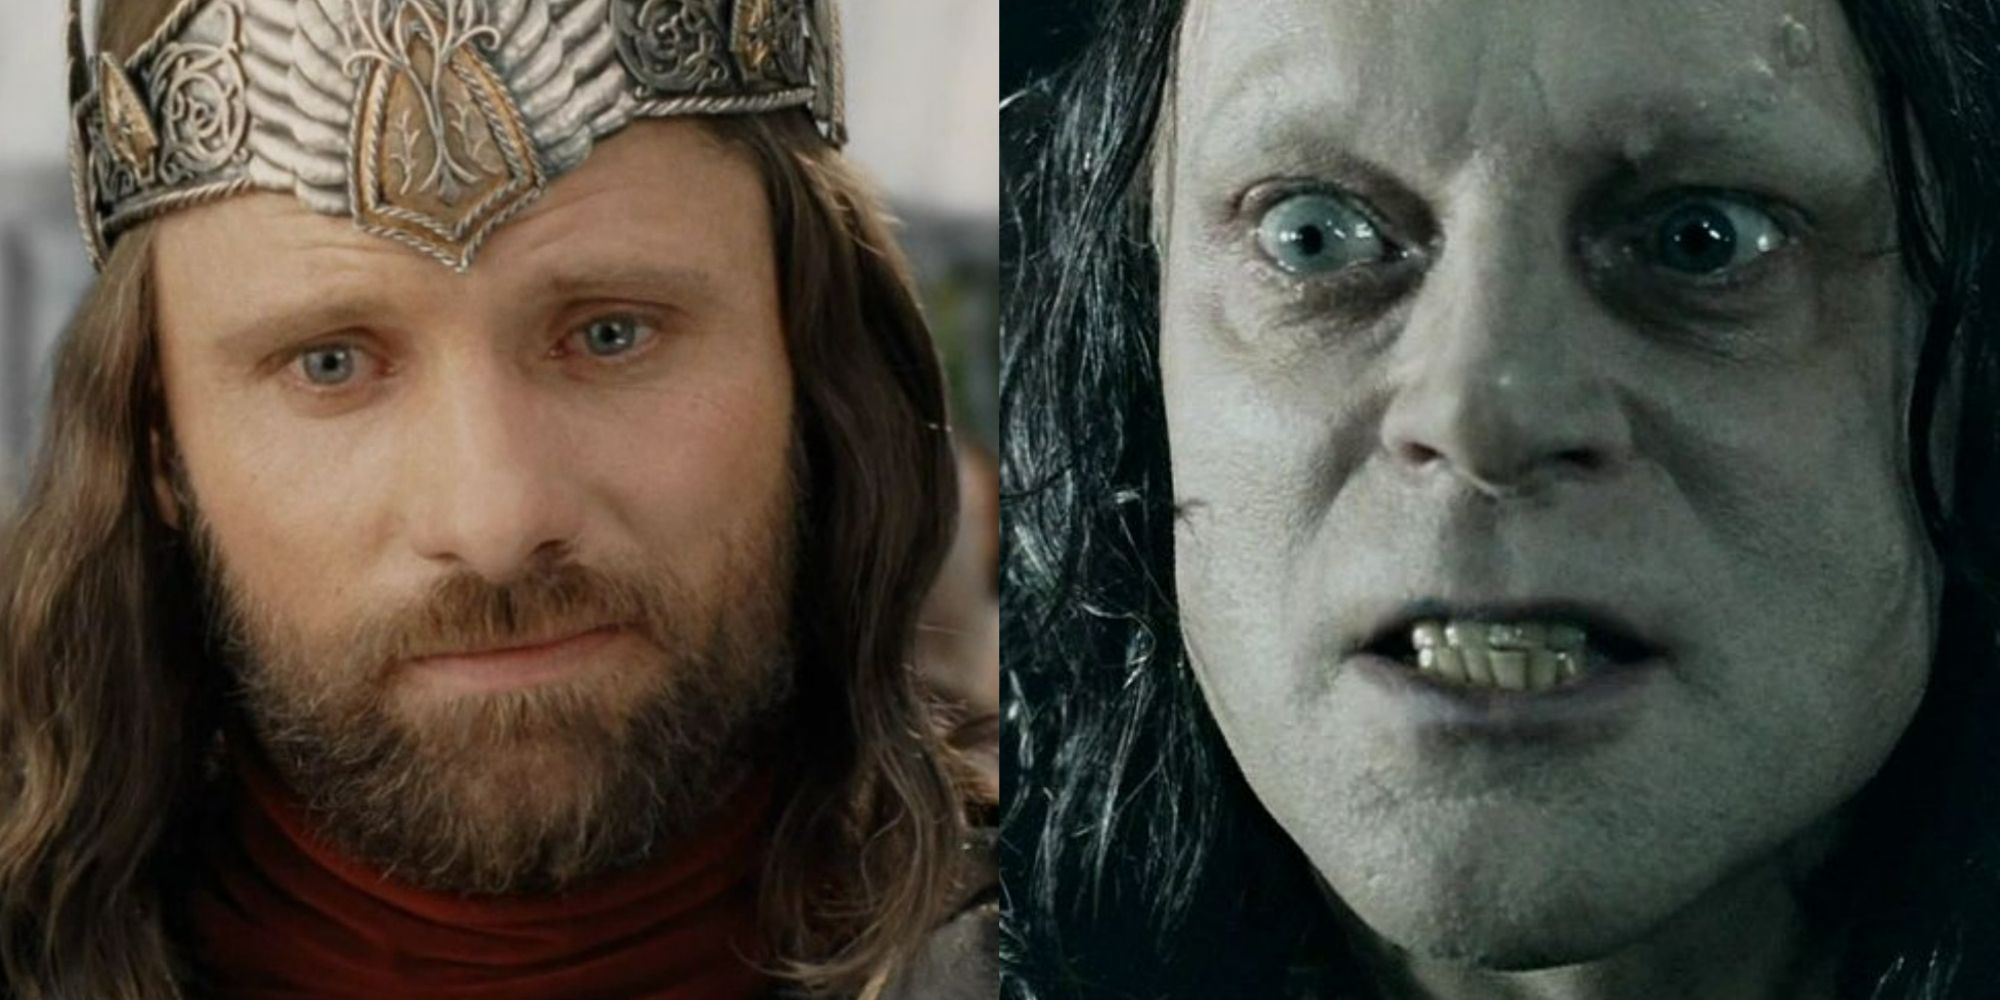 A split image showing Aragorn on the left and Grima on the right from Lord of the Rings. 